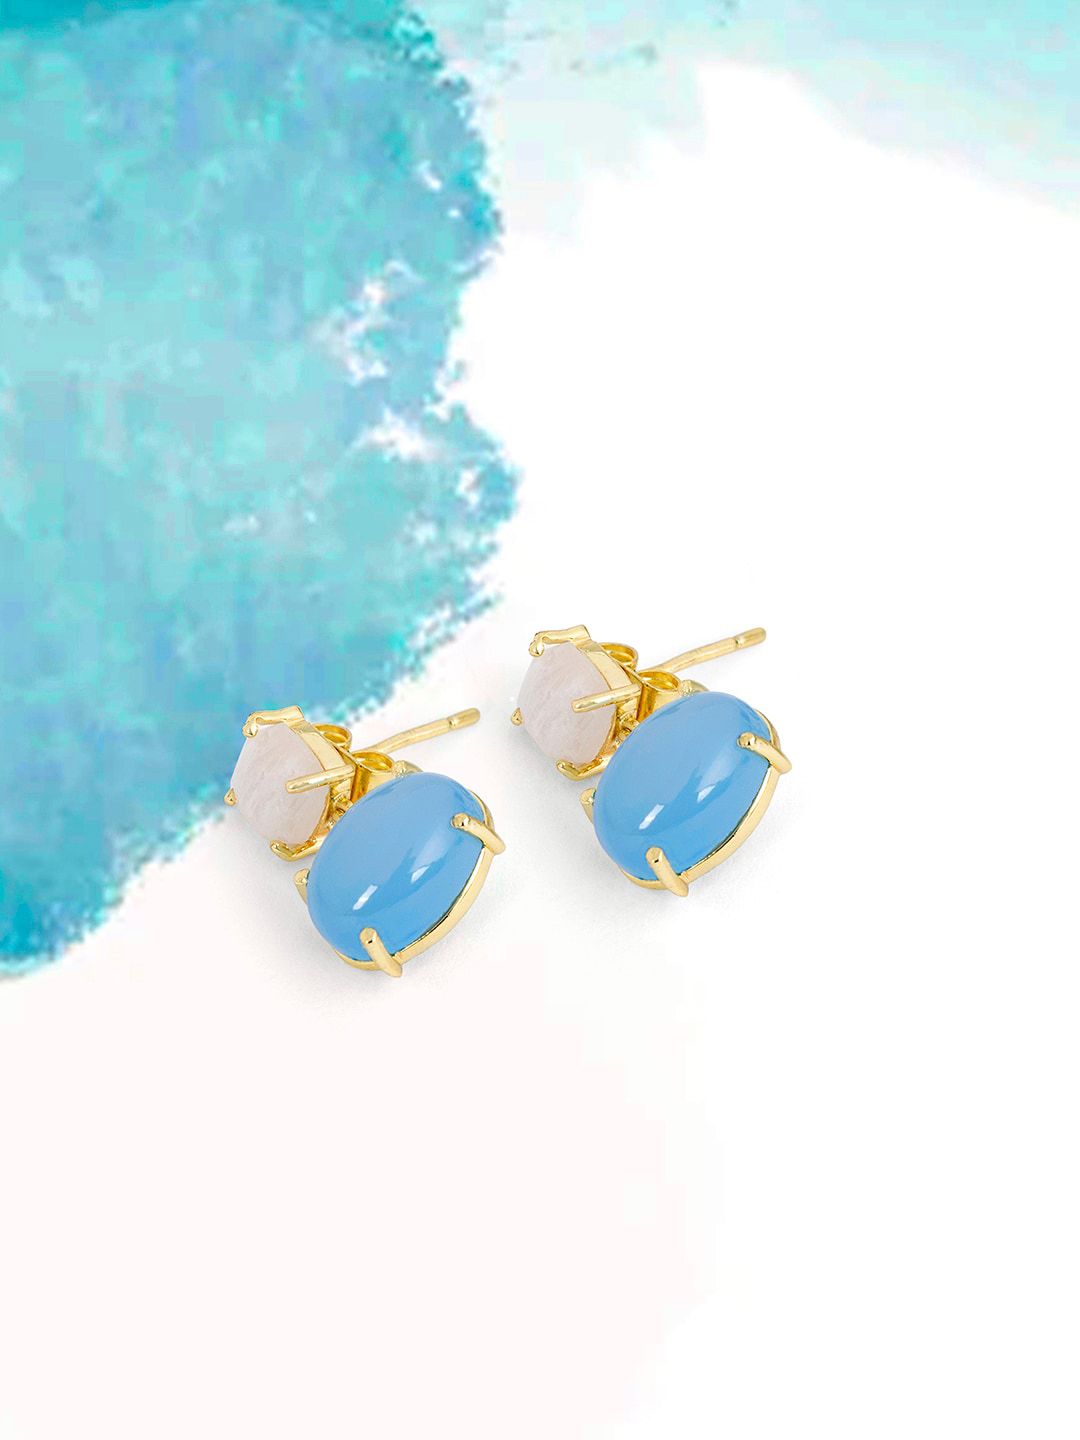 Mikoto by FableStreet Gold-Toned & Blue Contemporary Studs Earrings Price in India